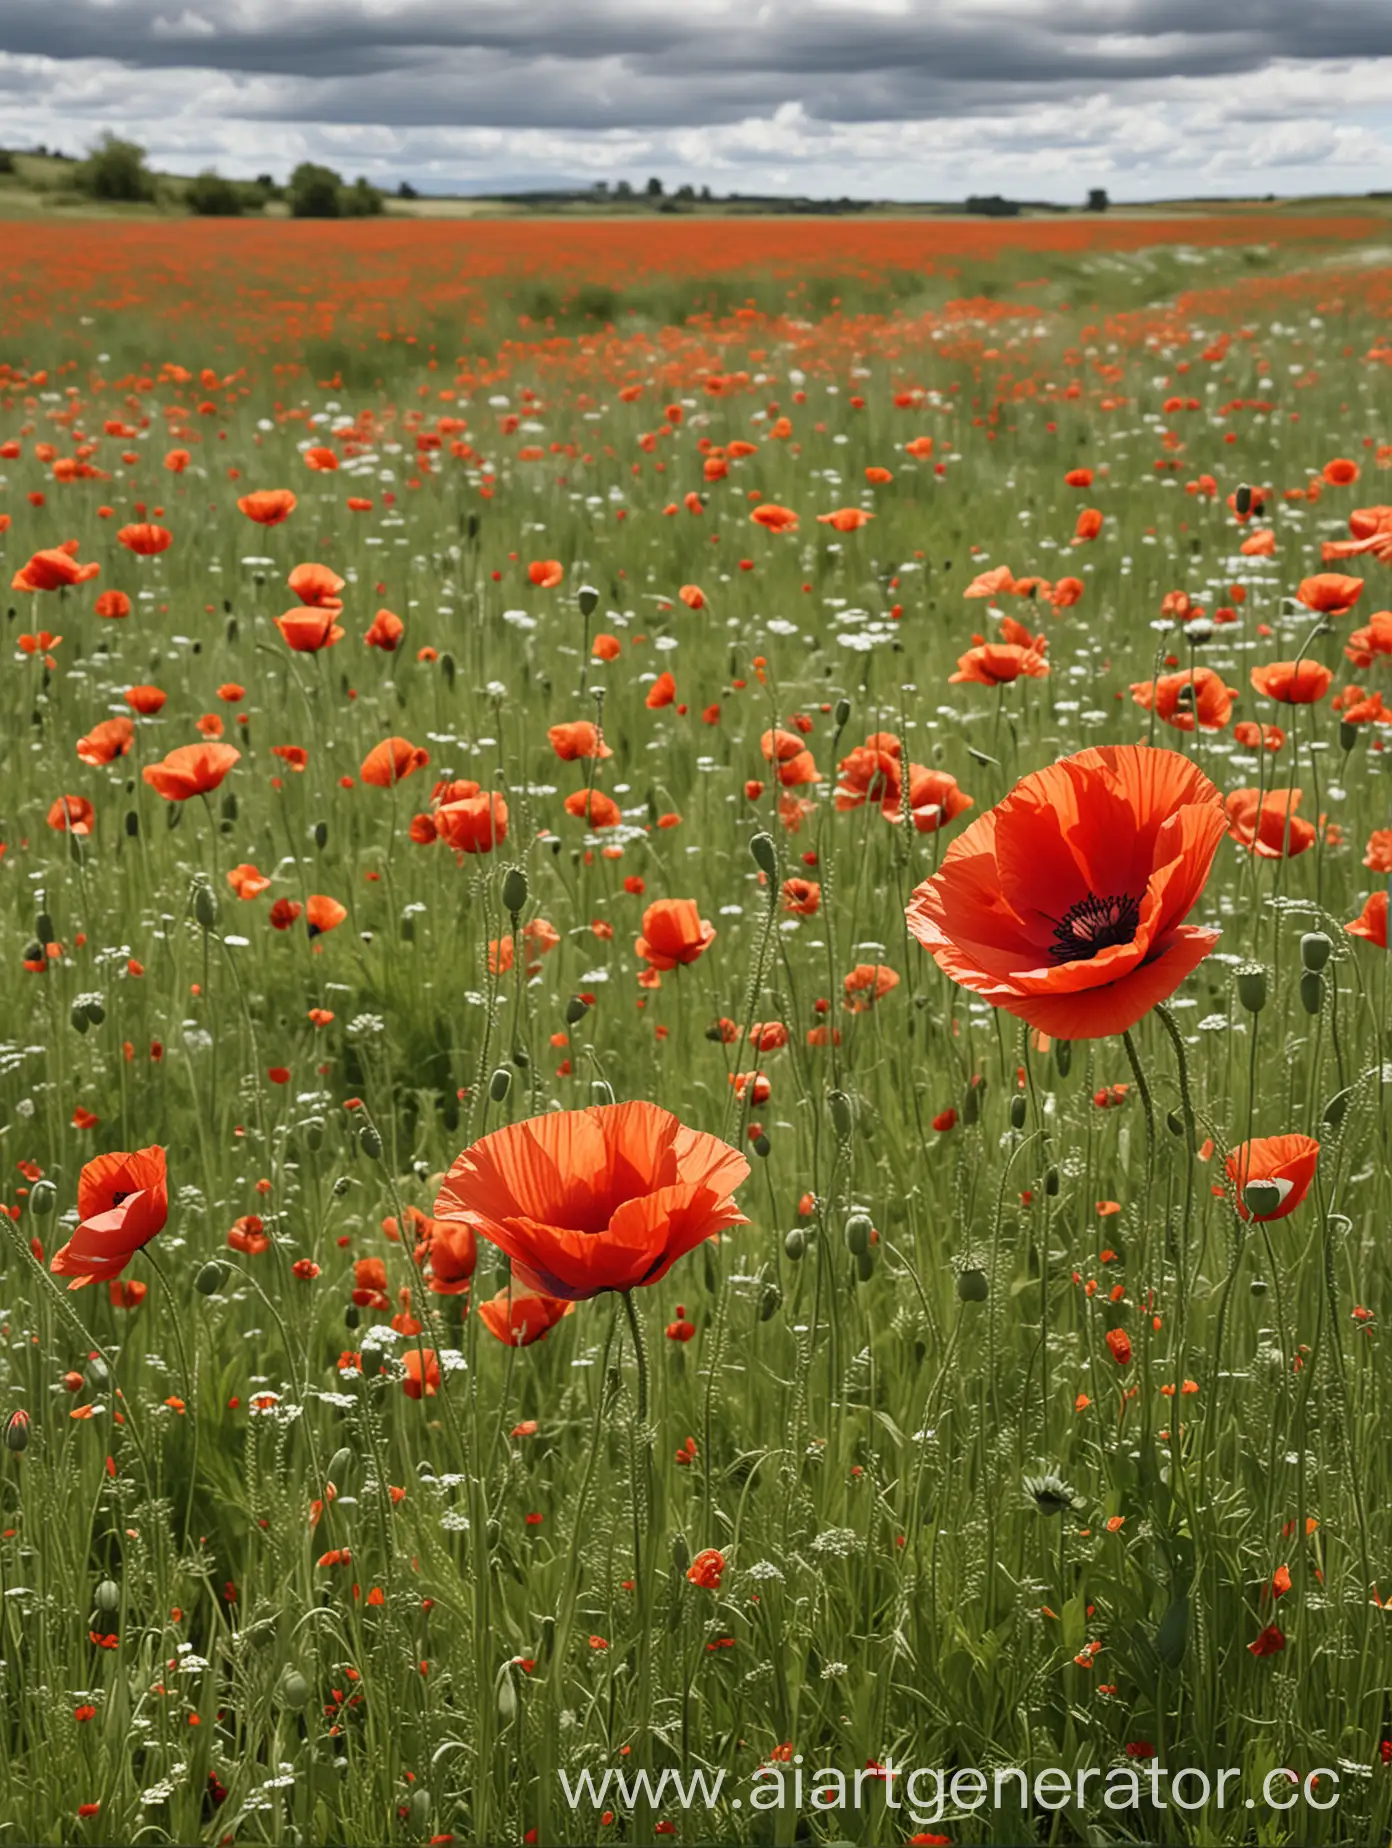 Whimsical-Meadow-Landscape-with-Swirling-Poppies